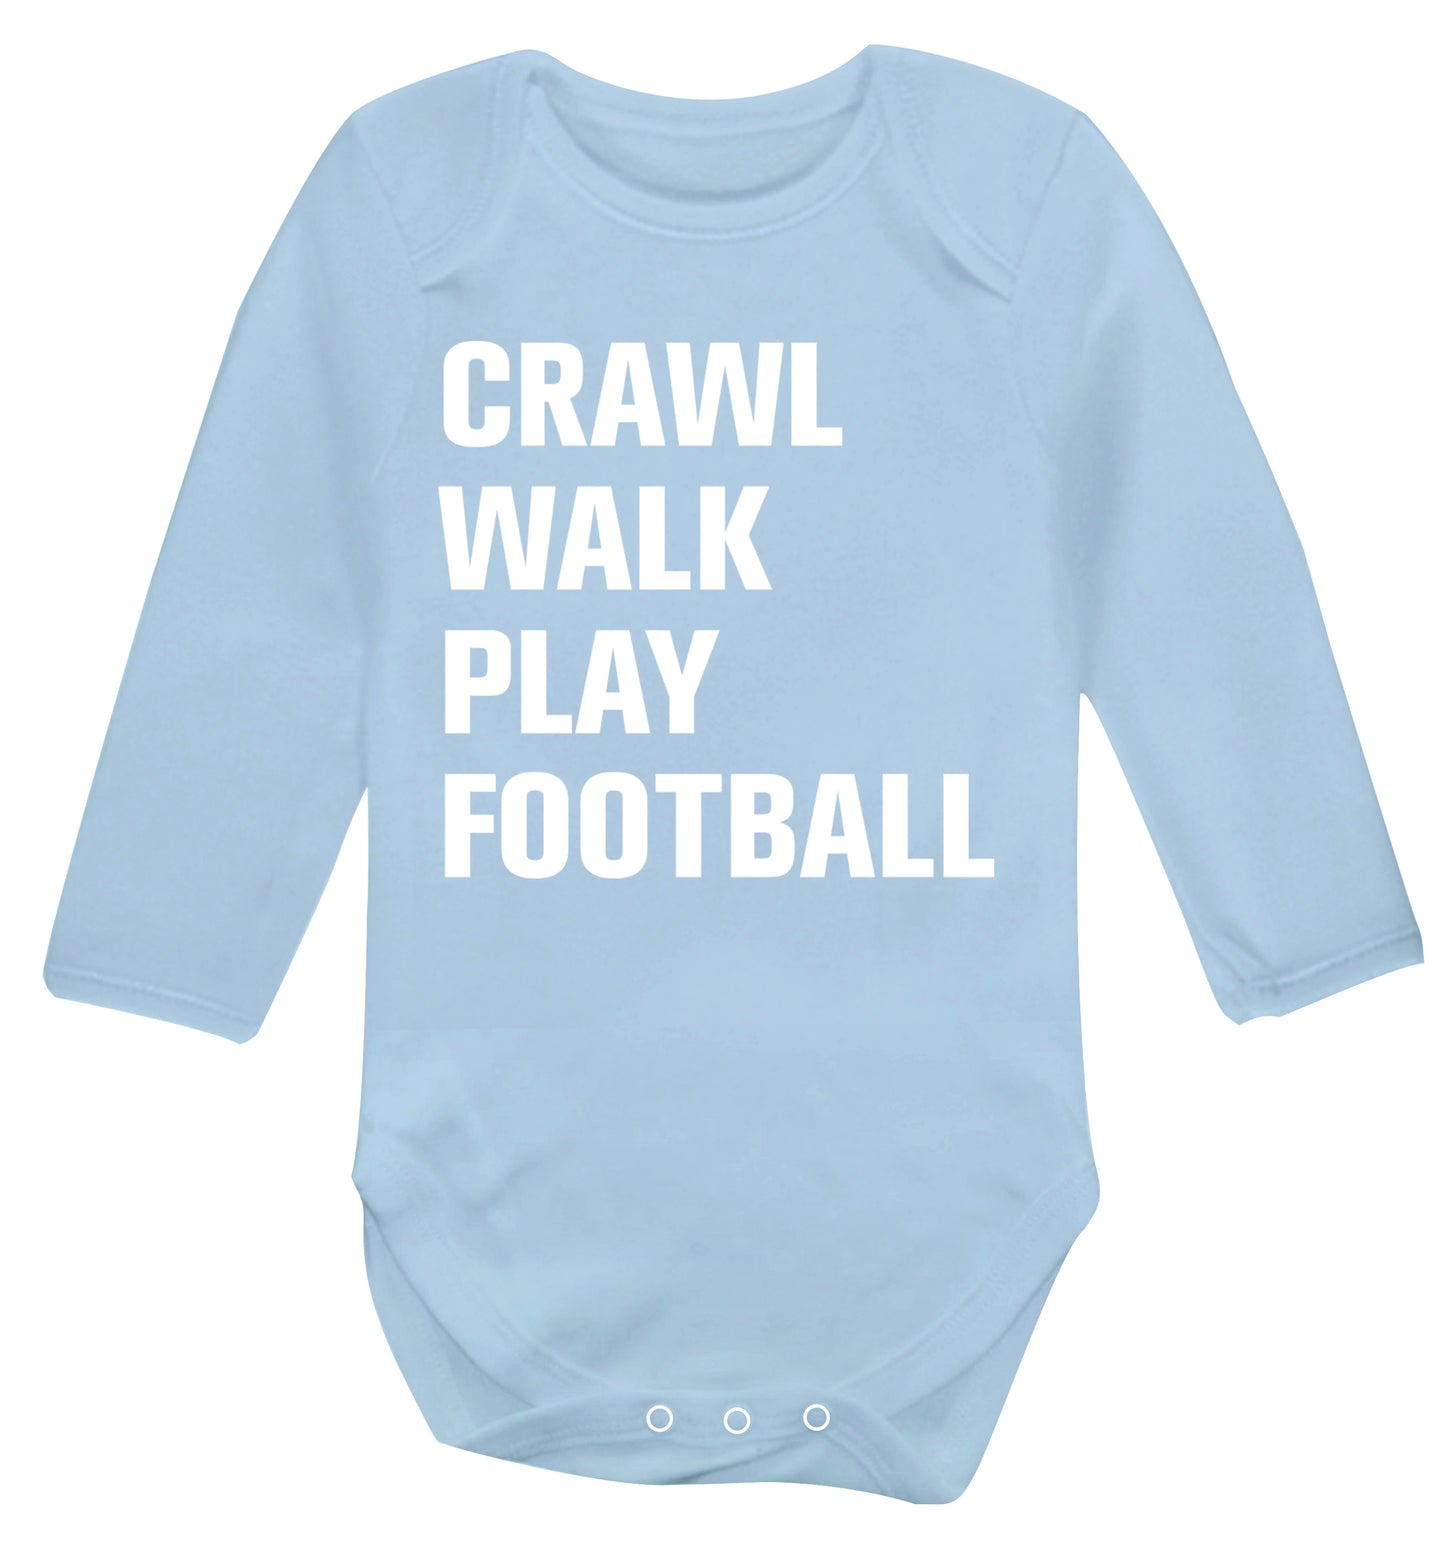 Crawl, walk, play football Baby Vest long sleeved pale blue 6-12 months